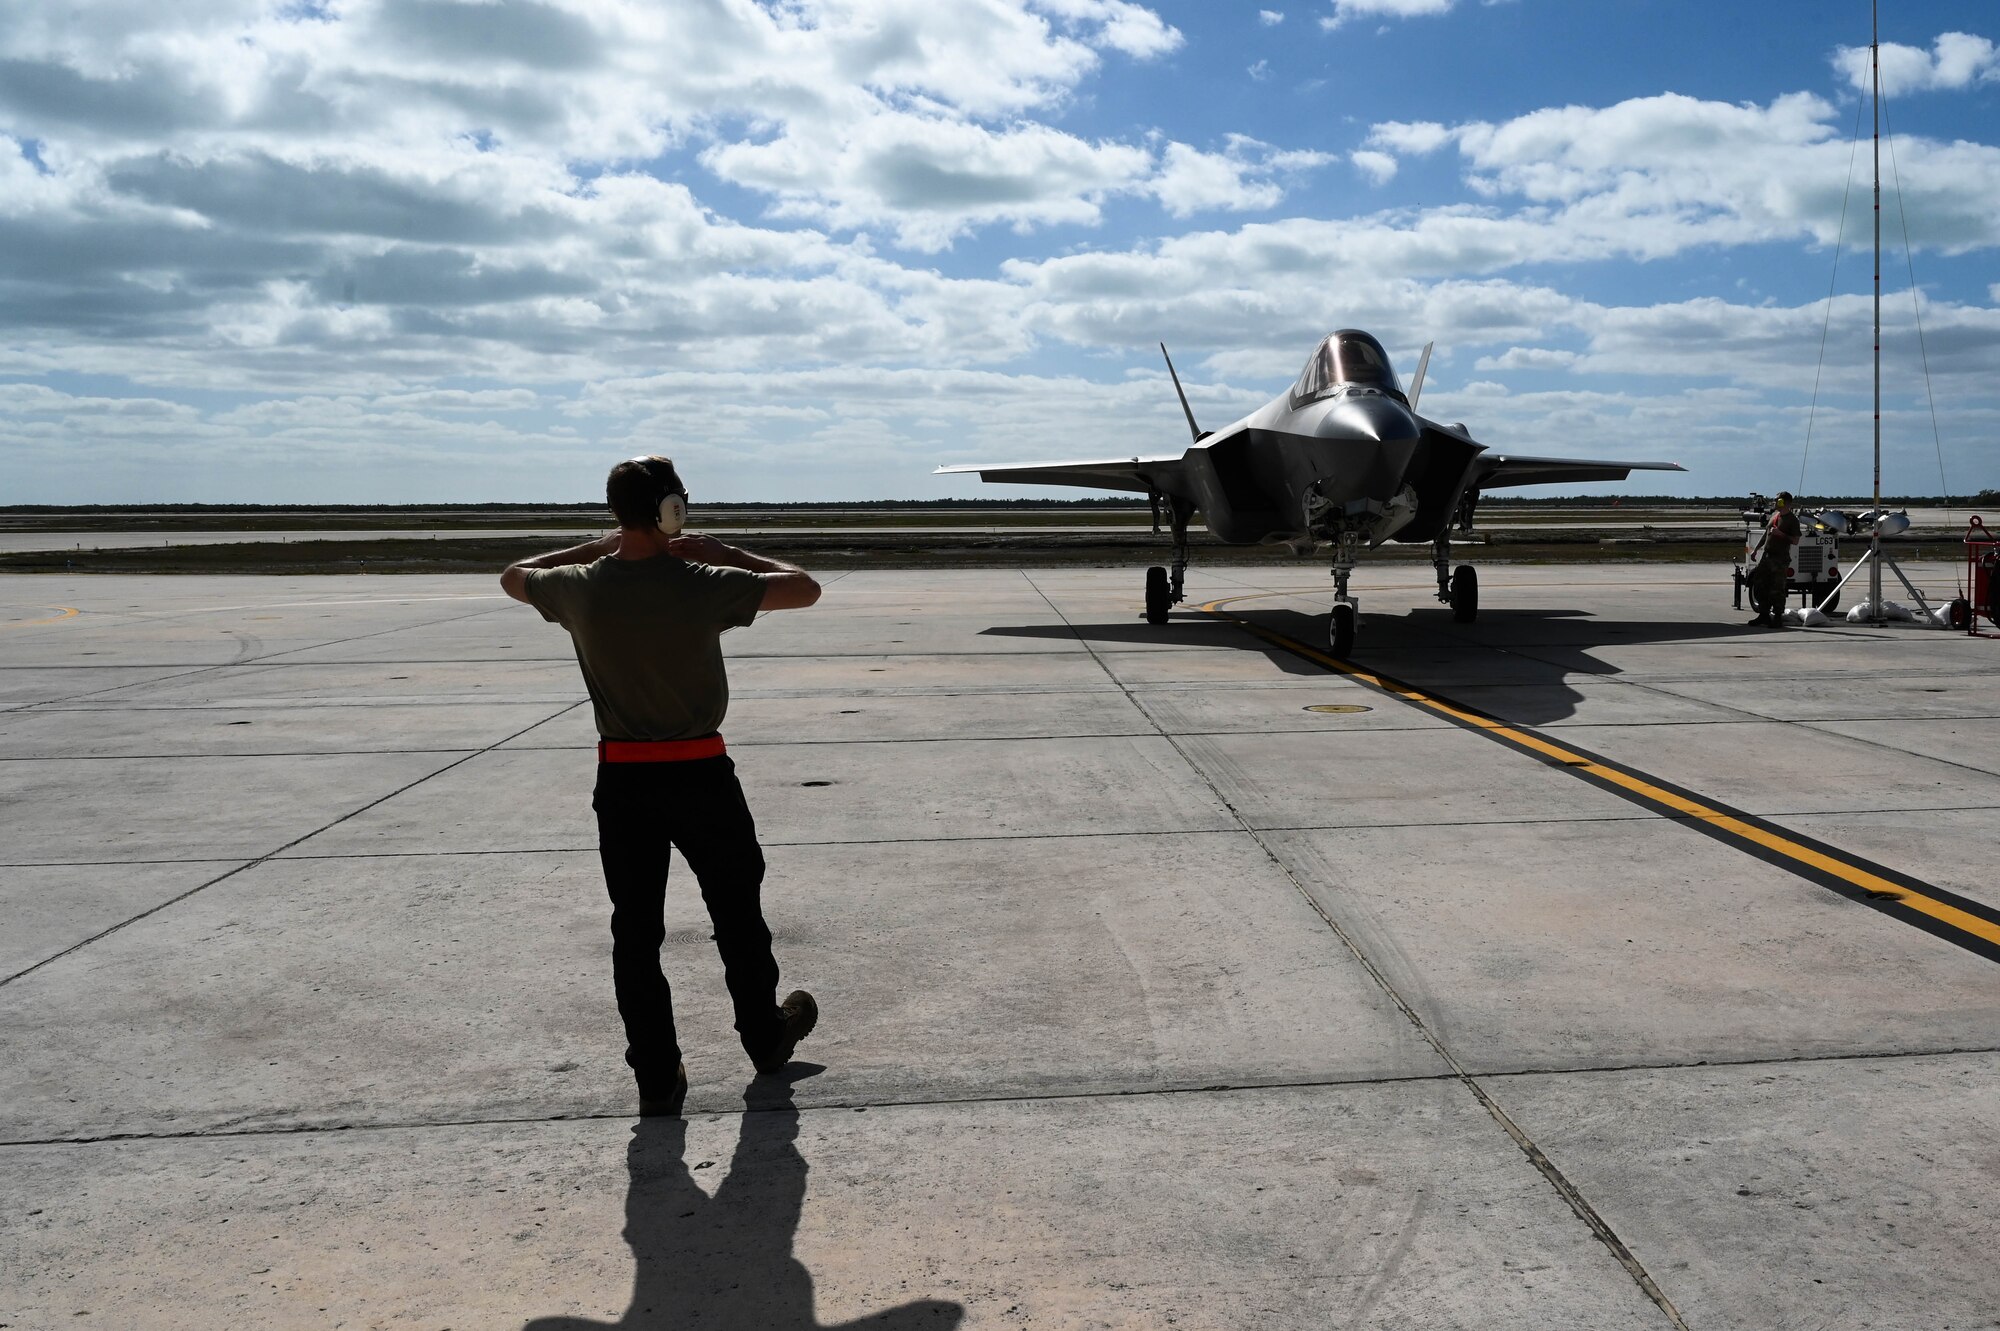 The 60th Fighter Squadron and AMU traveled to NAS Key West to take advantage of optimal weather conditions, focus on the training mission, practice skills in a new environment and build camaraderie in the units.